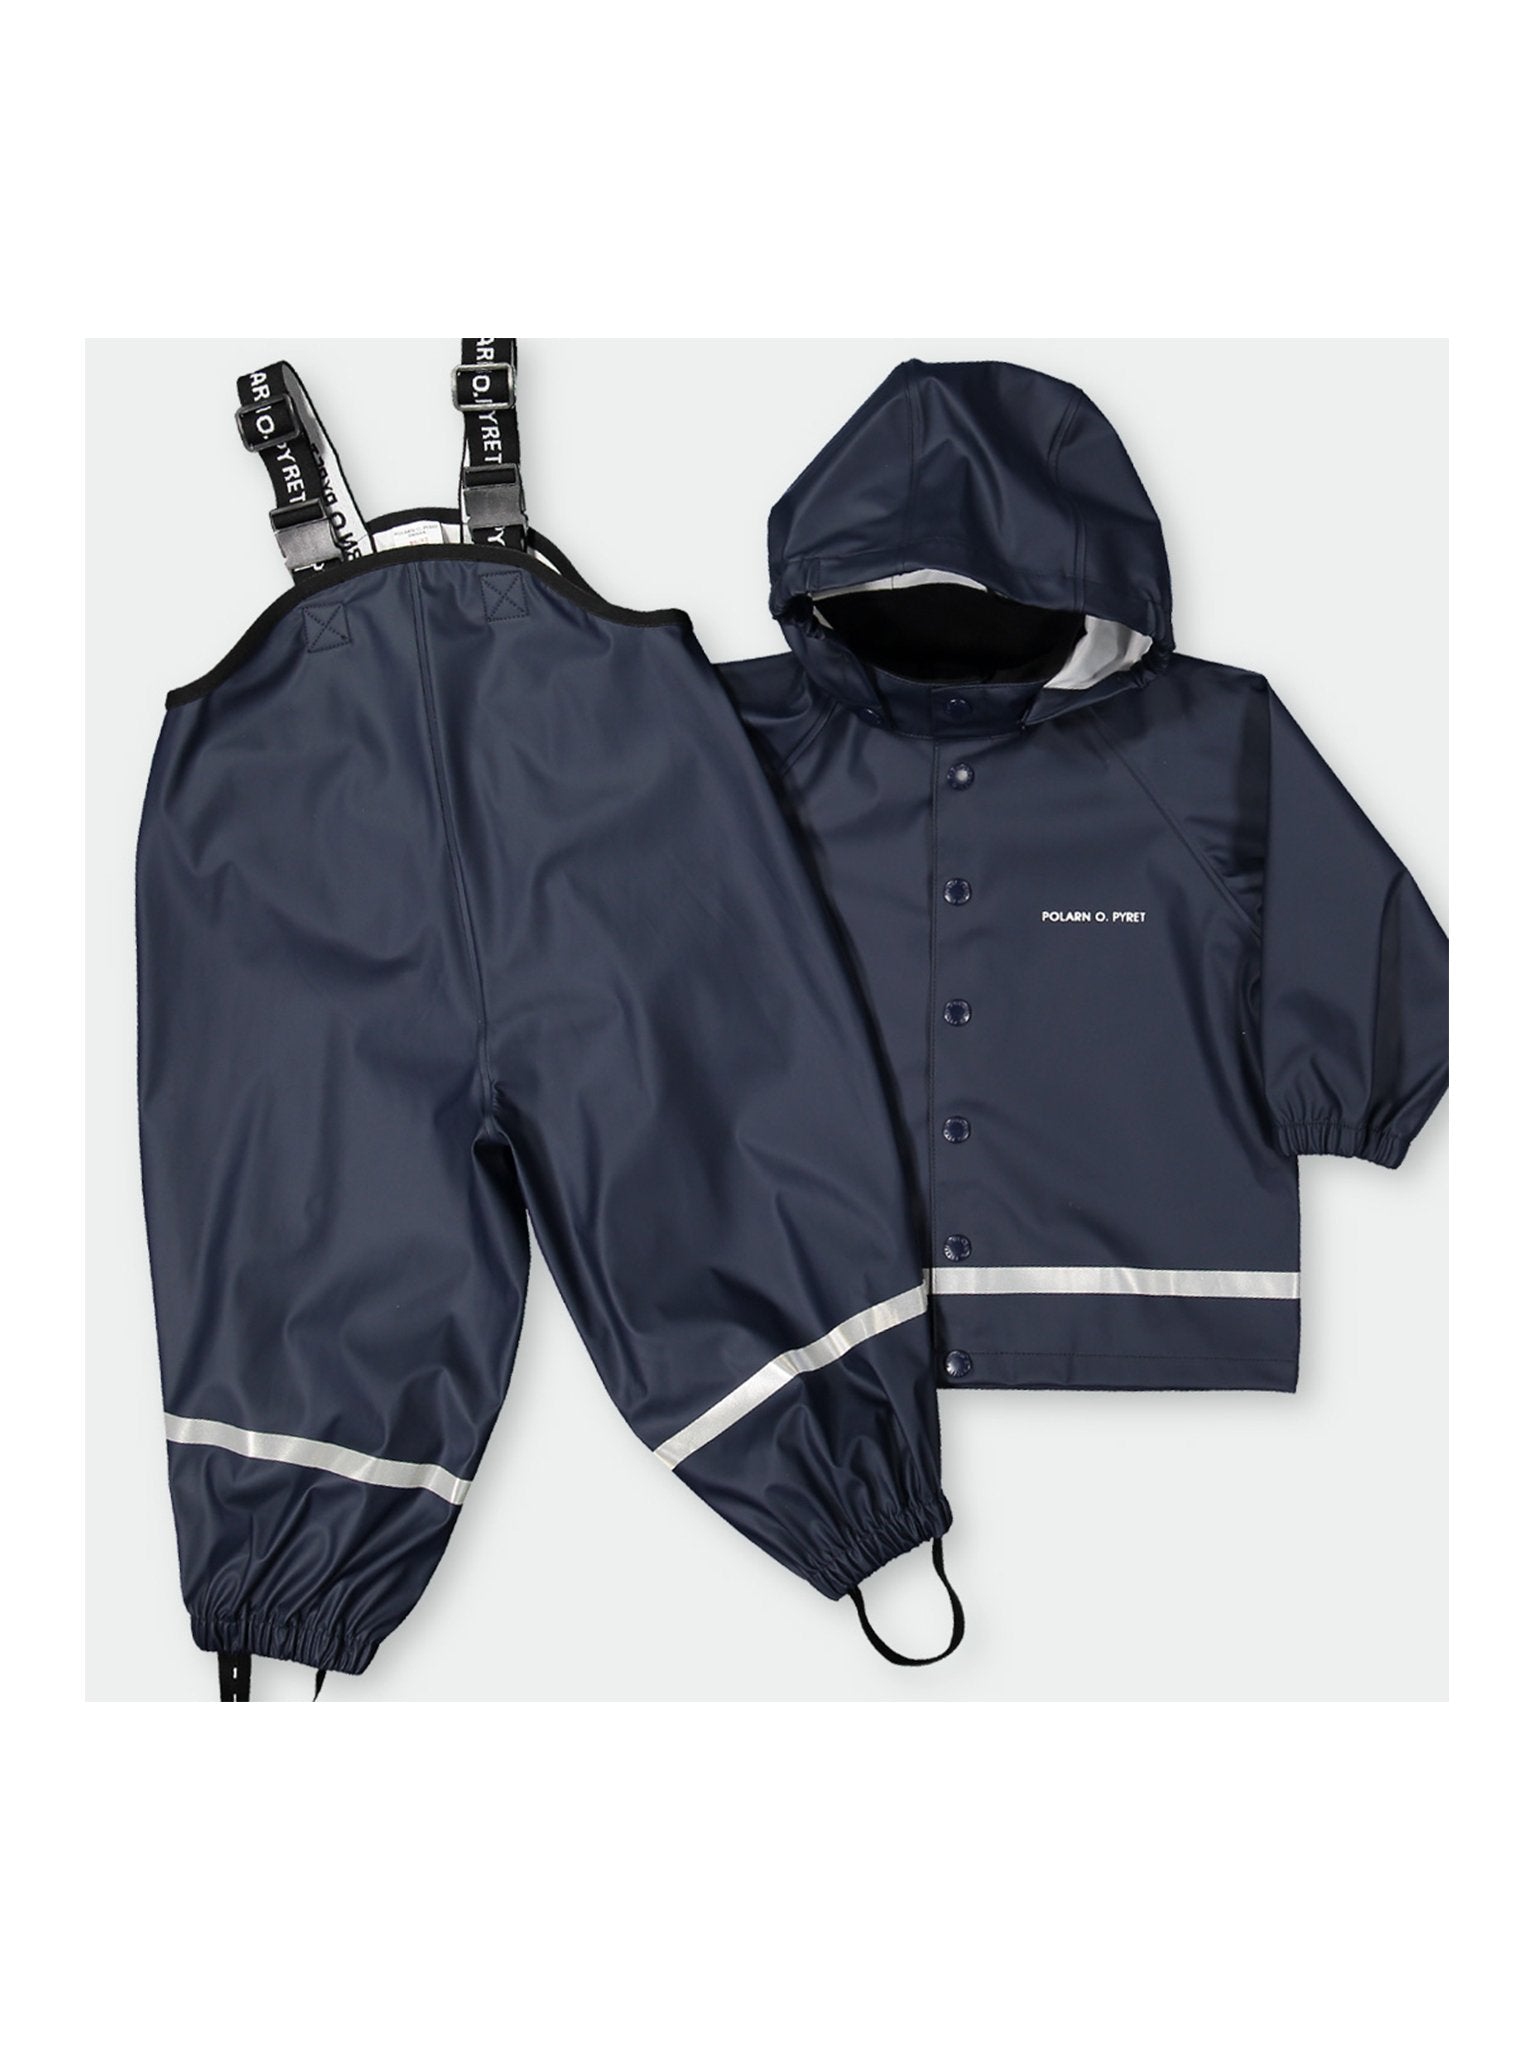 Navy, kids waterproof raincoat which comes with a hood, paired with navy kids rain trousers which comes with a suspender.